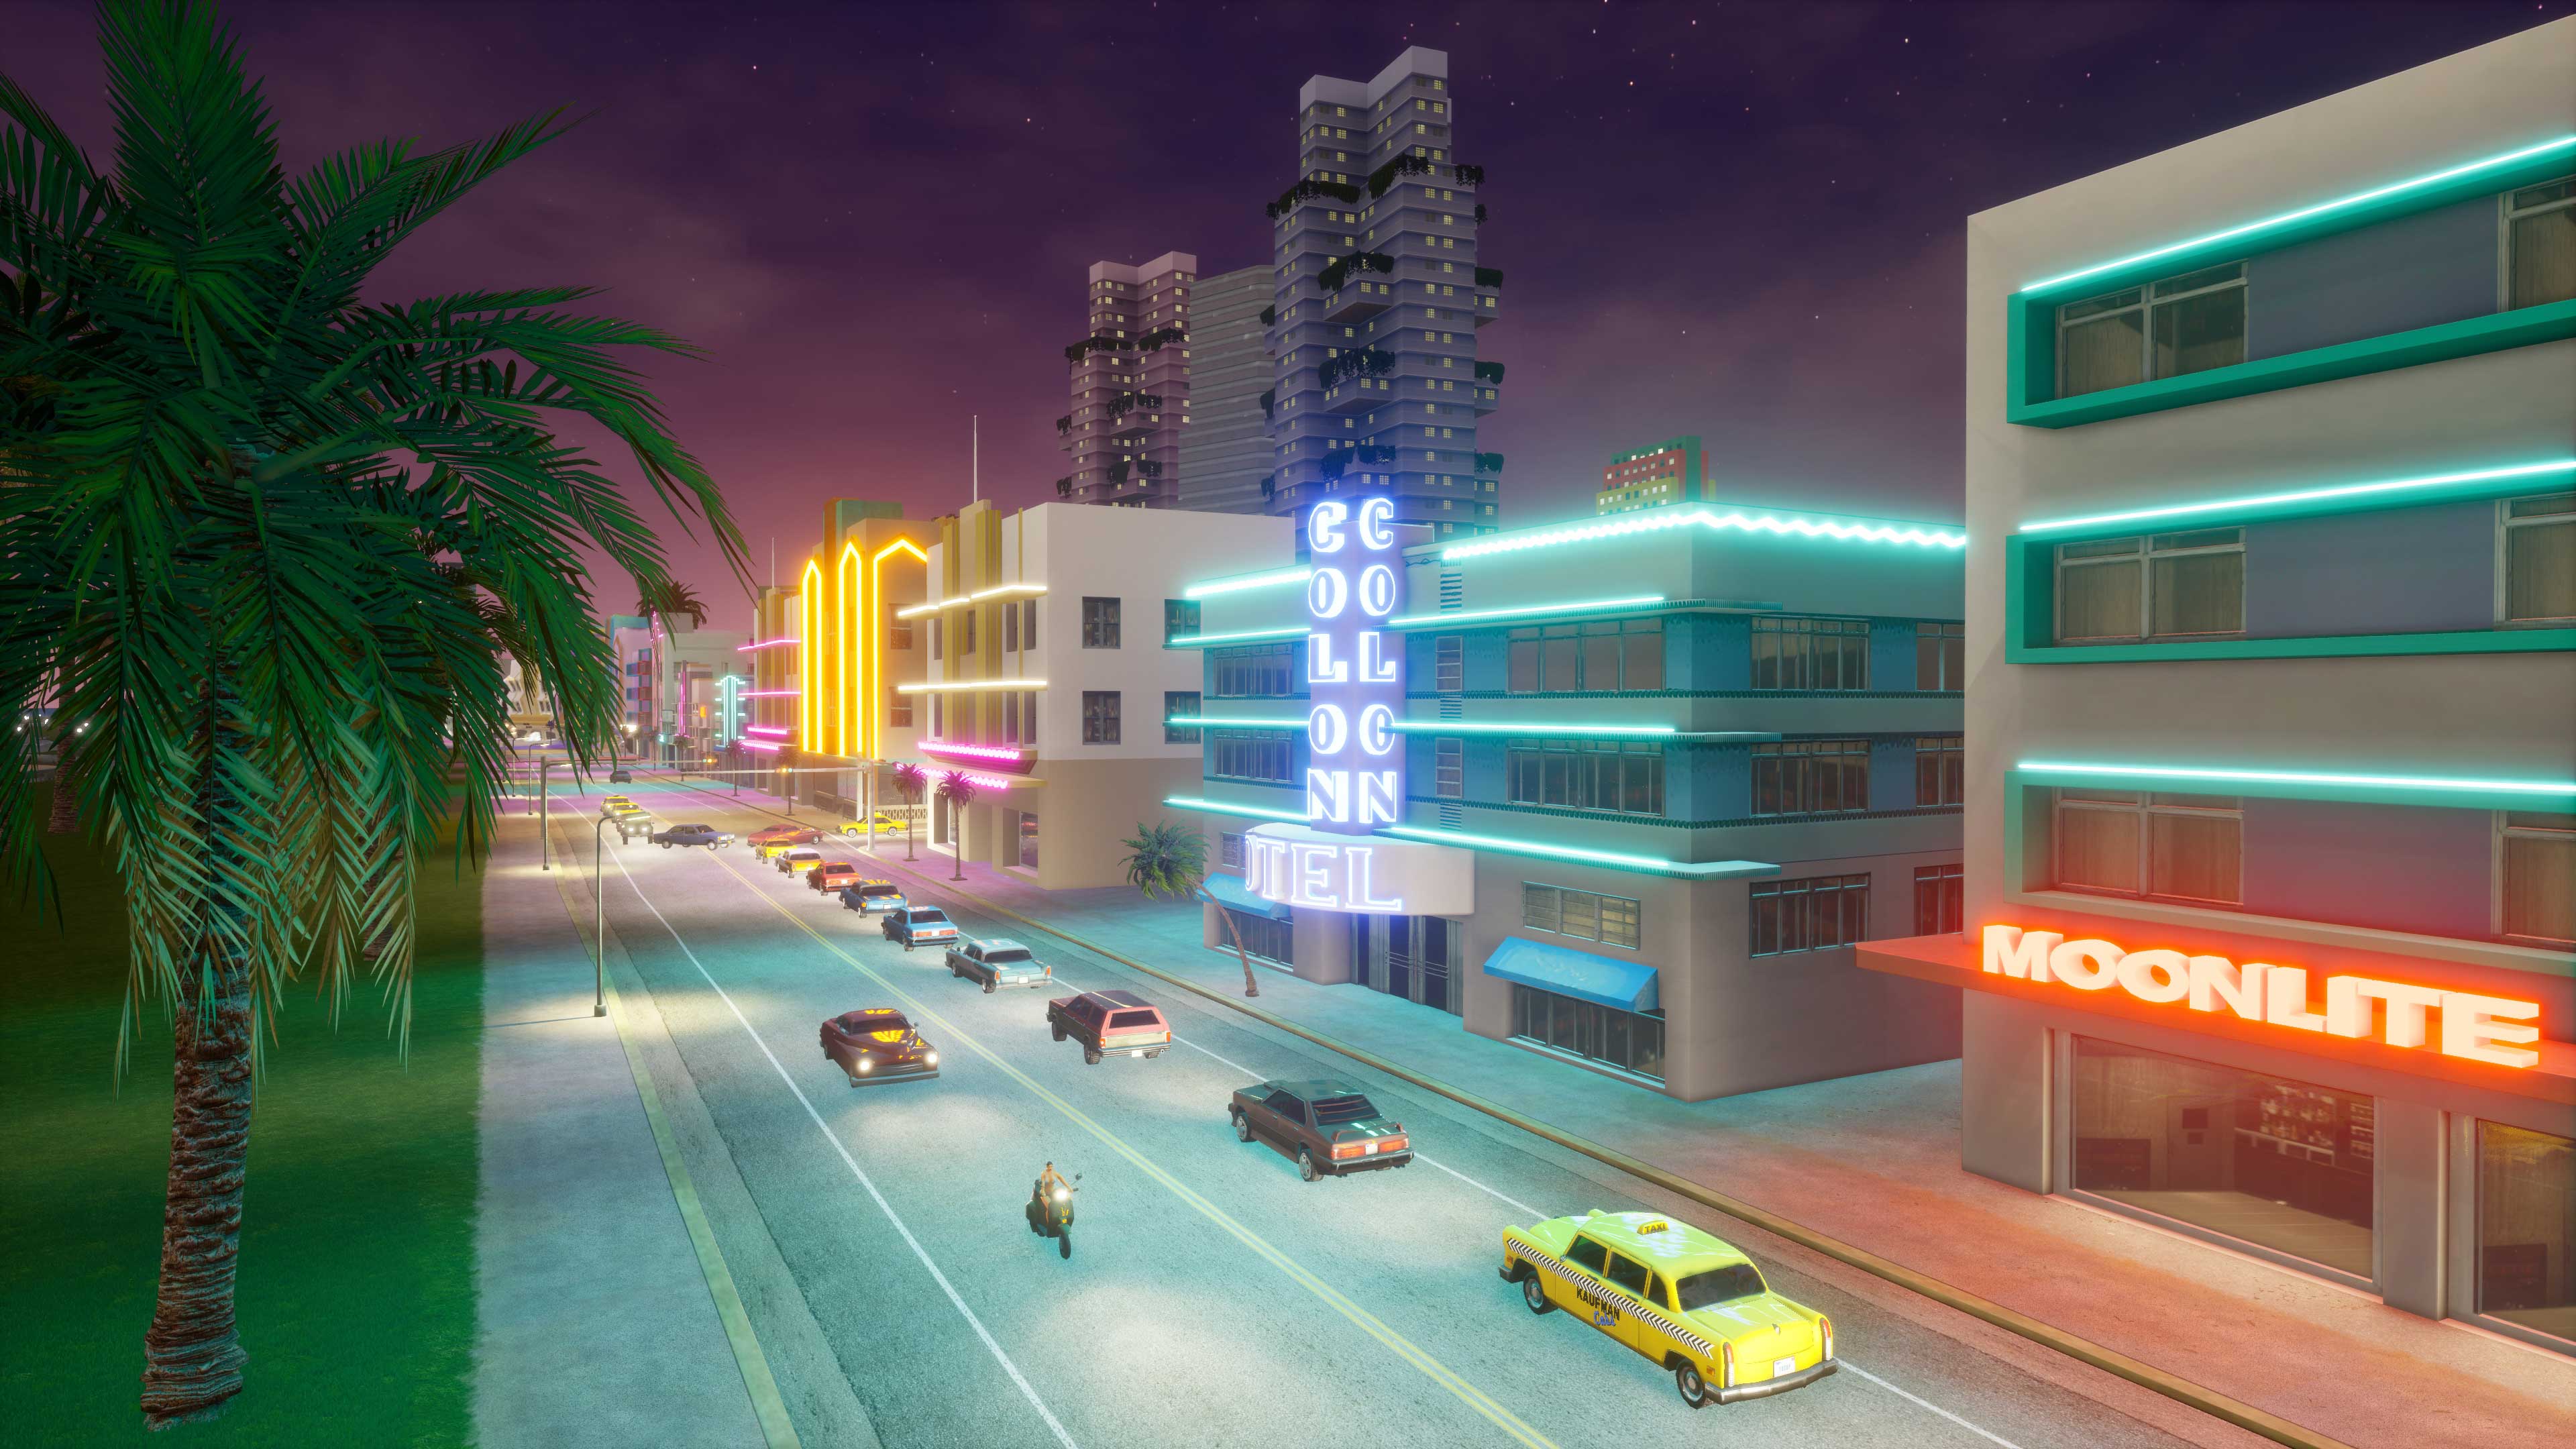 Screenshot: game-images/Grand_Theft_Auto_The_Trilogy_-_Definitive_Edition_screenshots_690337.jpg